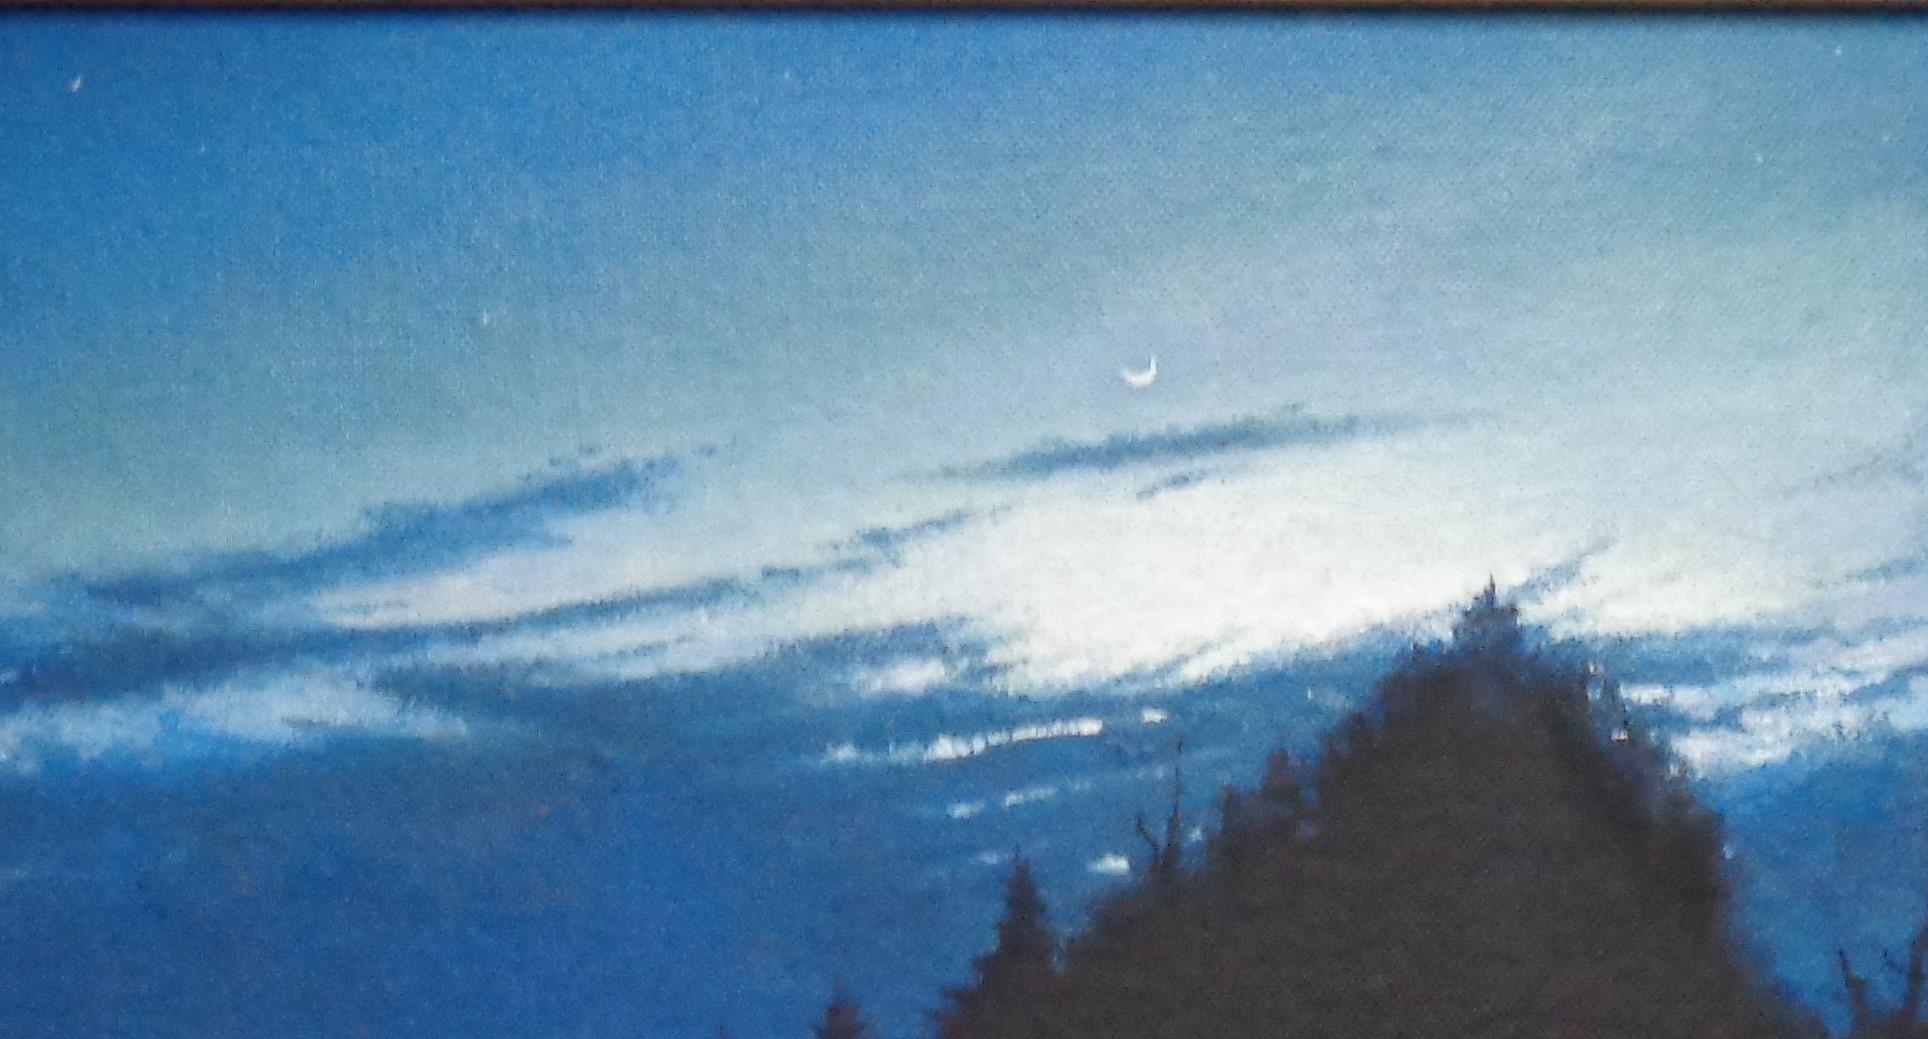  Impressionistic Nocturne Landscape Oil Painting Michael Budden Stars Moon Night For Sale 4